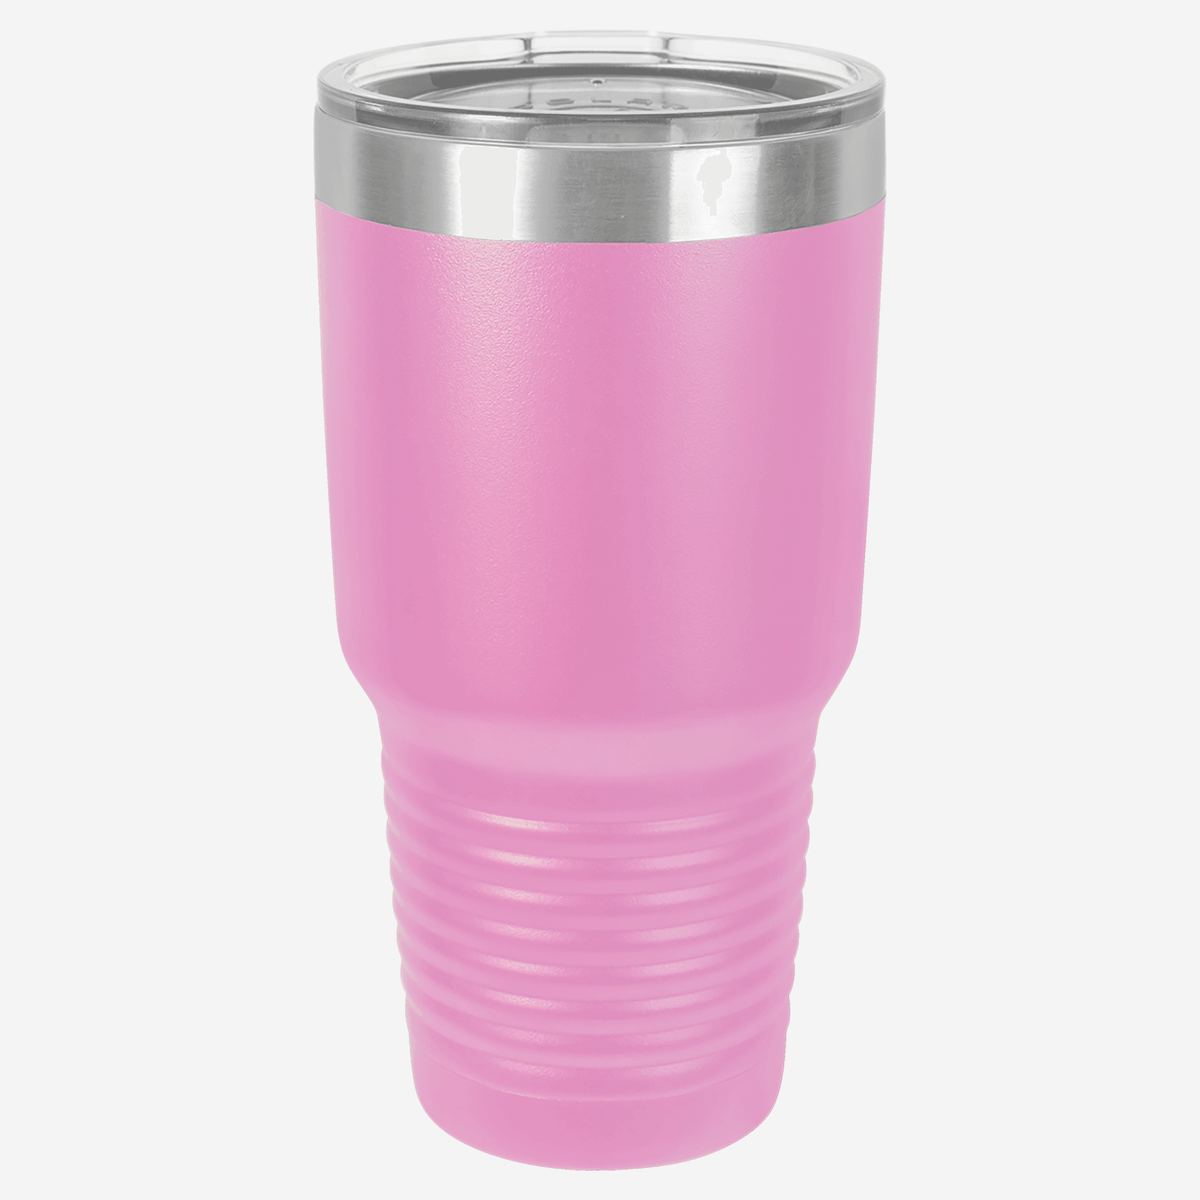 30 oz. light purple stainless steel tumbler with silver ring at top clear lid